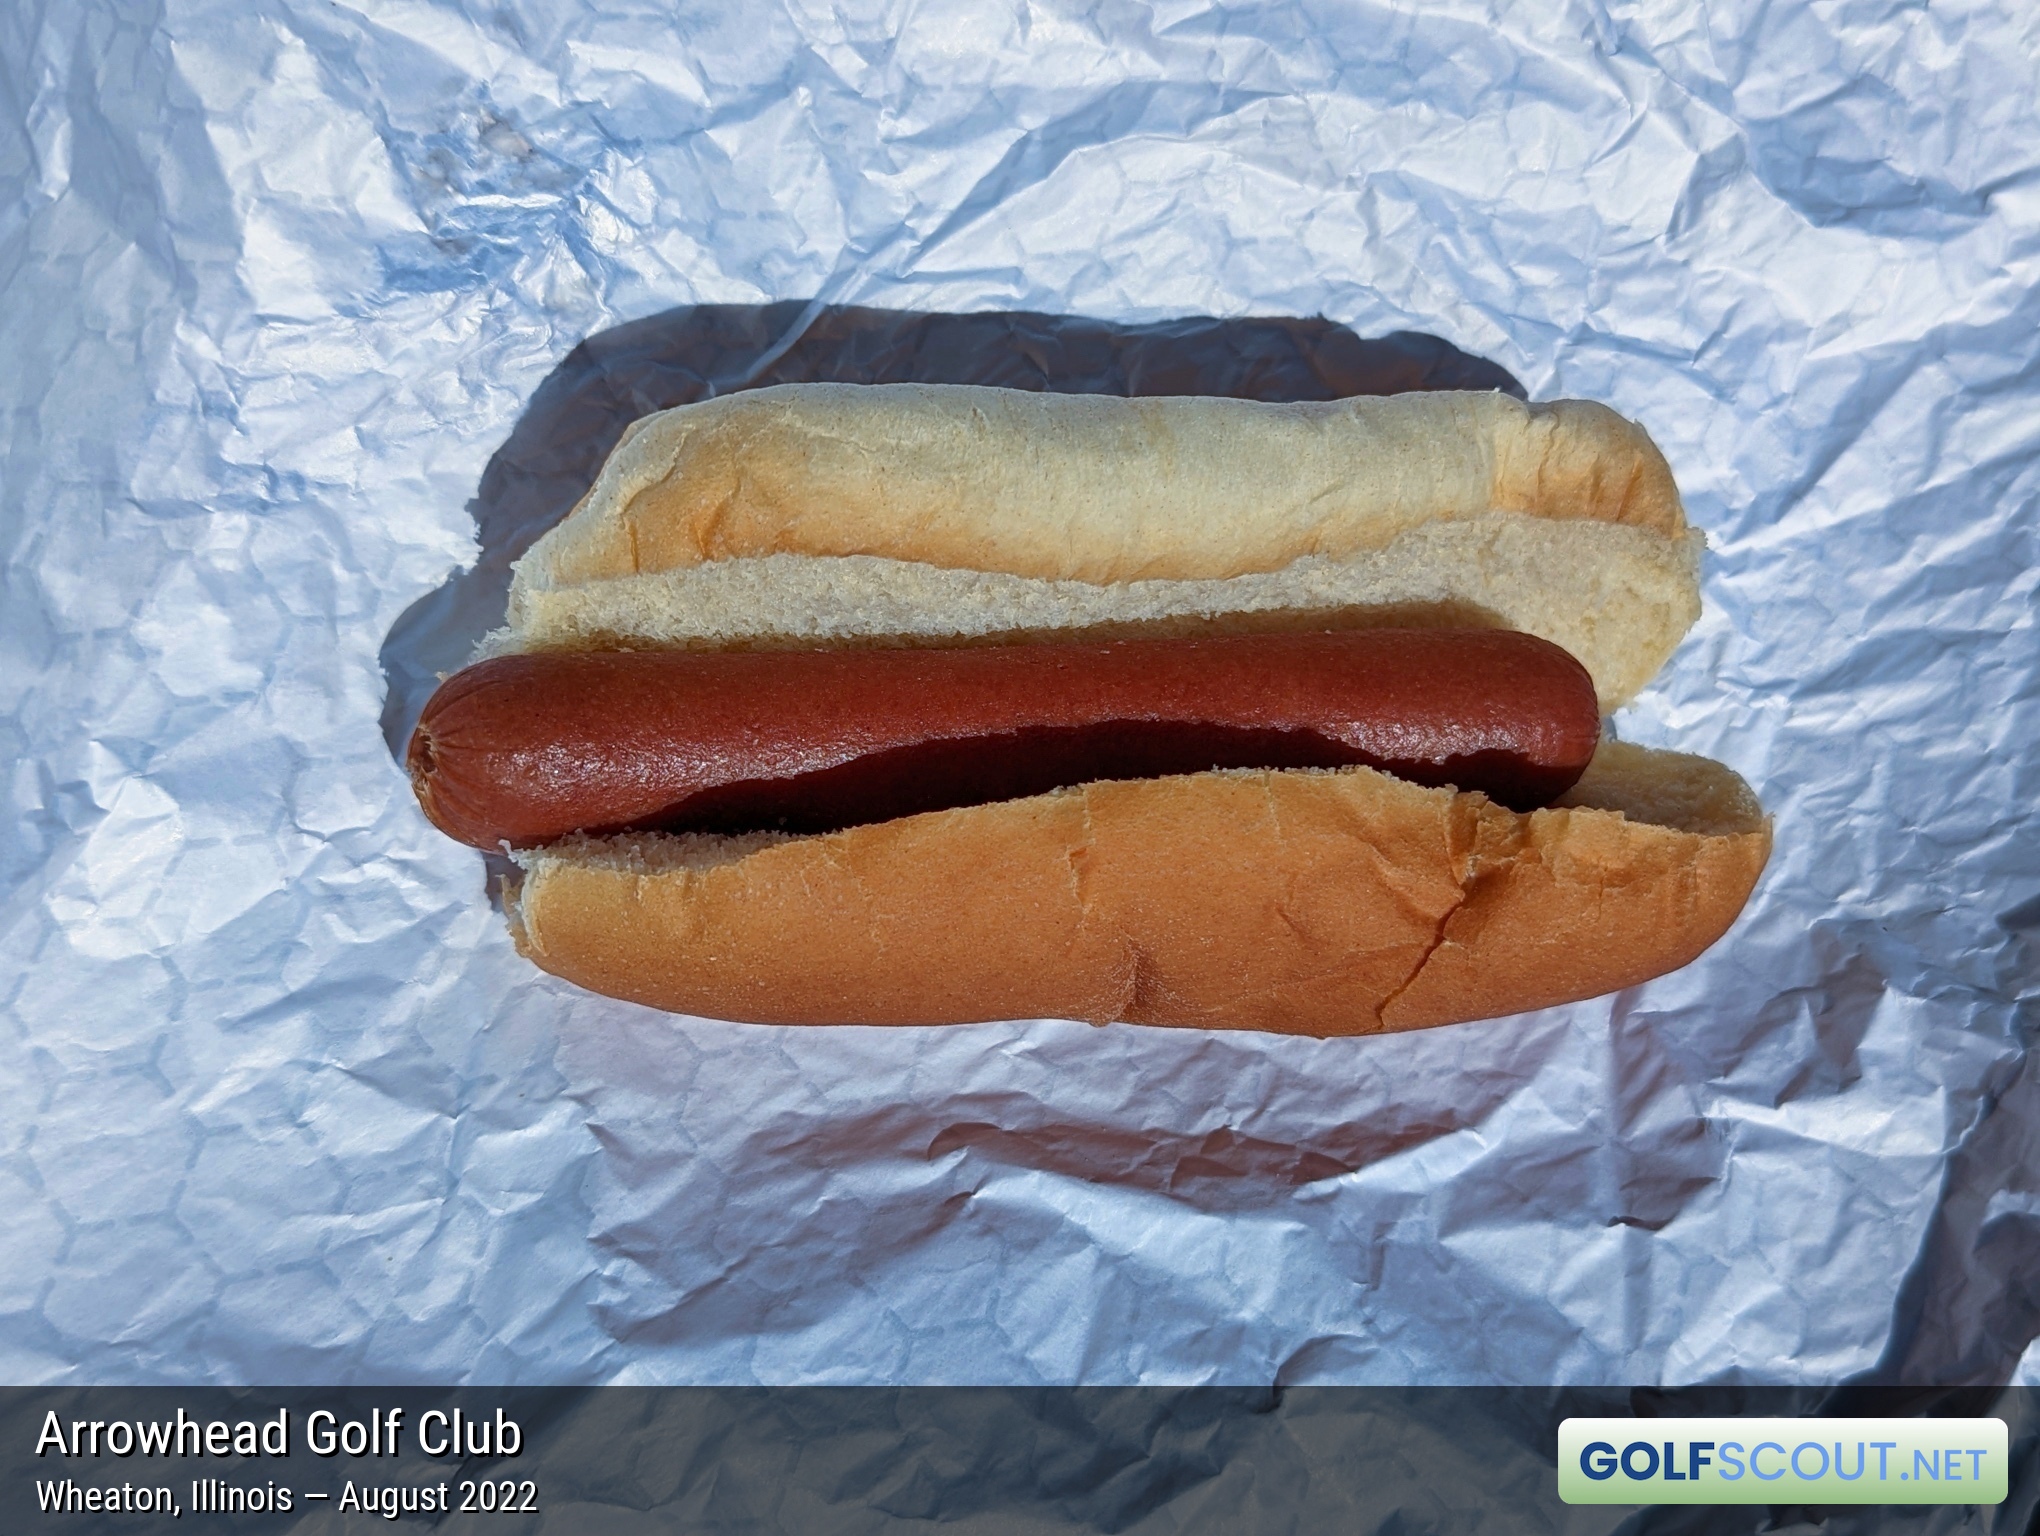 Photo of the food and dining at Arrowhead Golf Club in Wheaton, Illinois. Photo of the hot dog at Arrowhead Golf Club in Wheaton, Illinois.